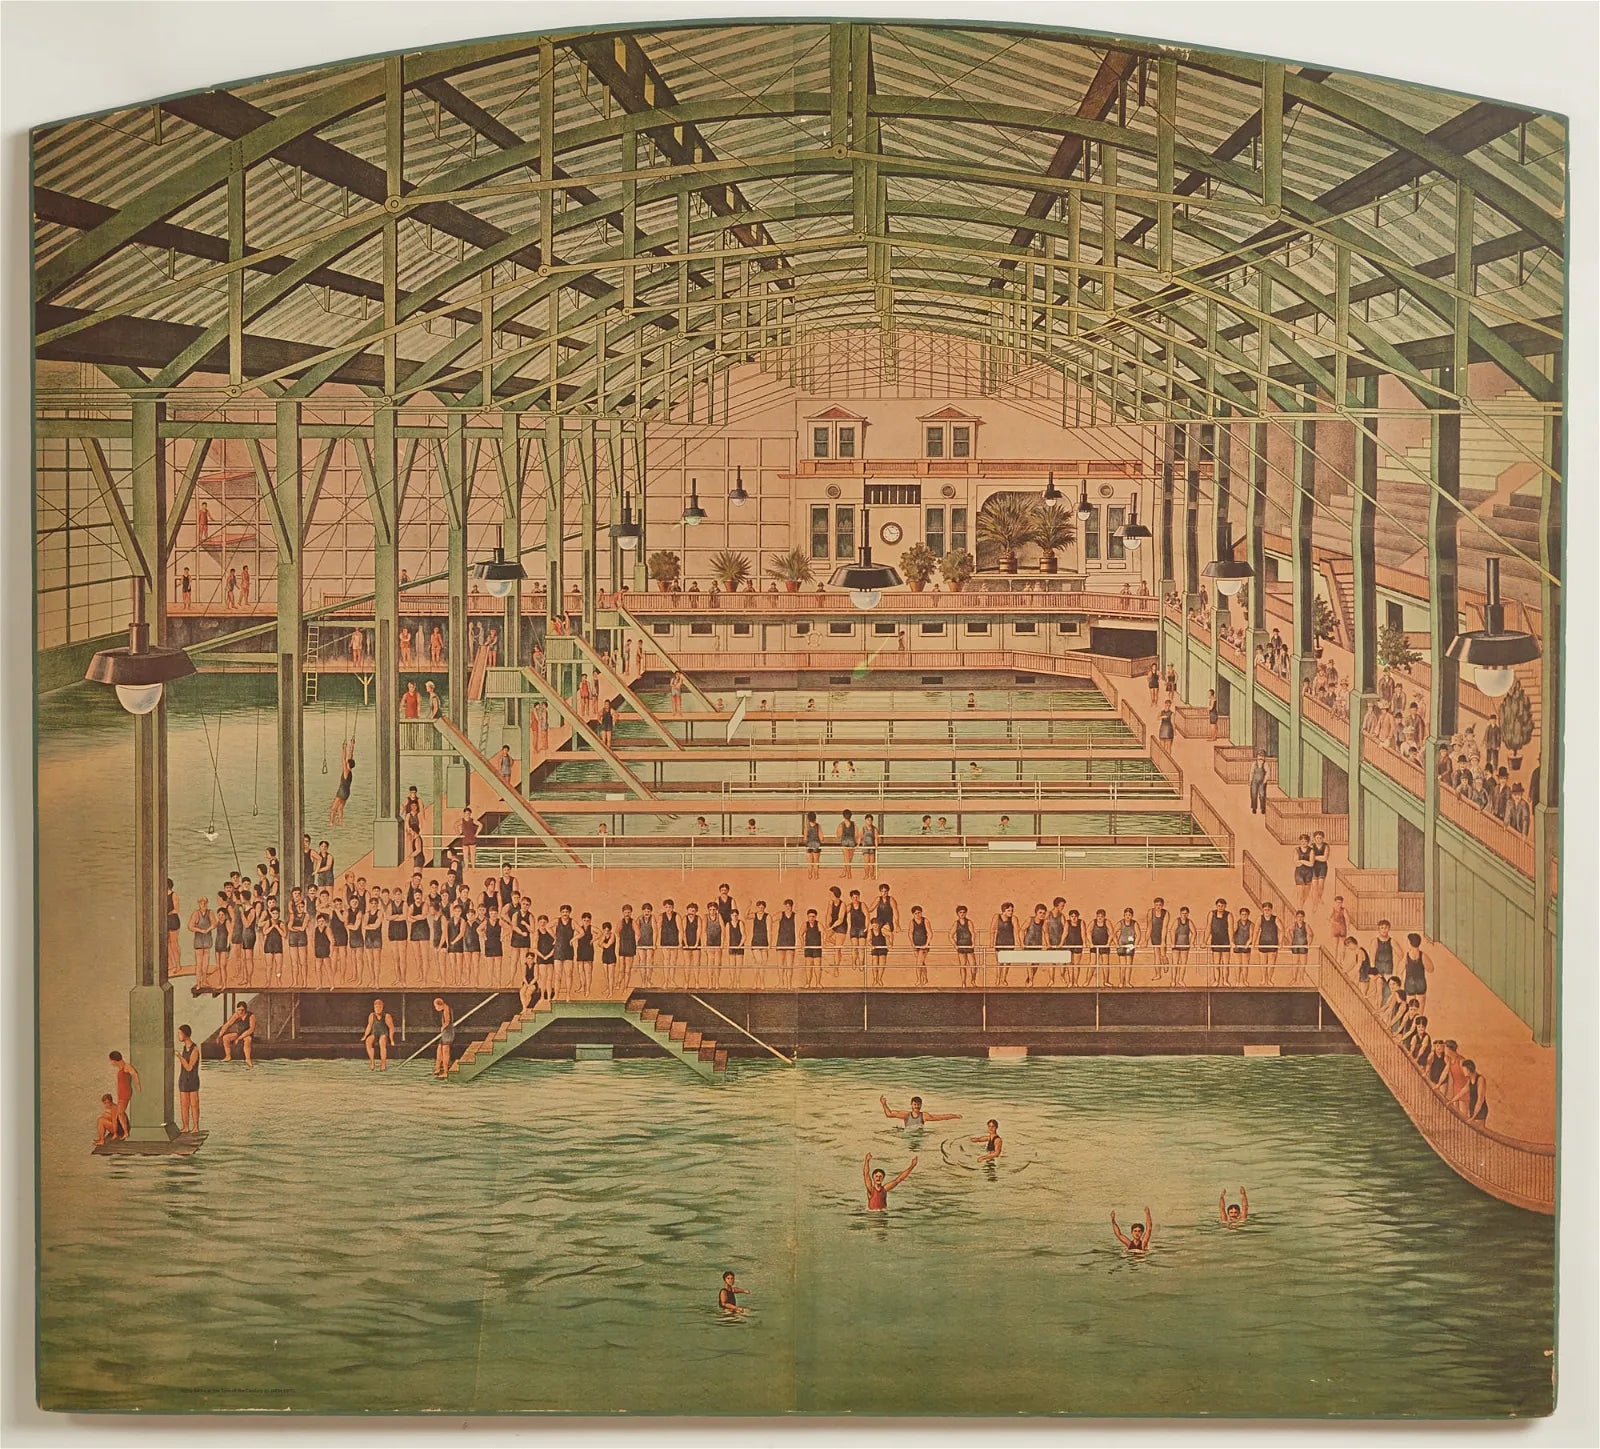 AW8-005: Circa 1970 Lithograph Laid to Board - The Sutro Baths at the turn of the 20th Century